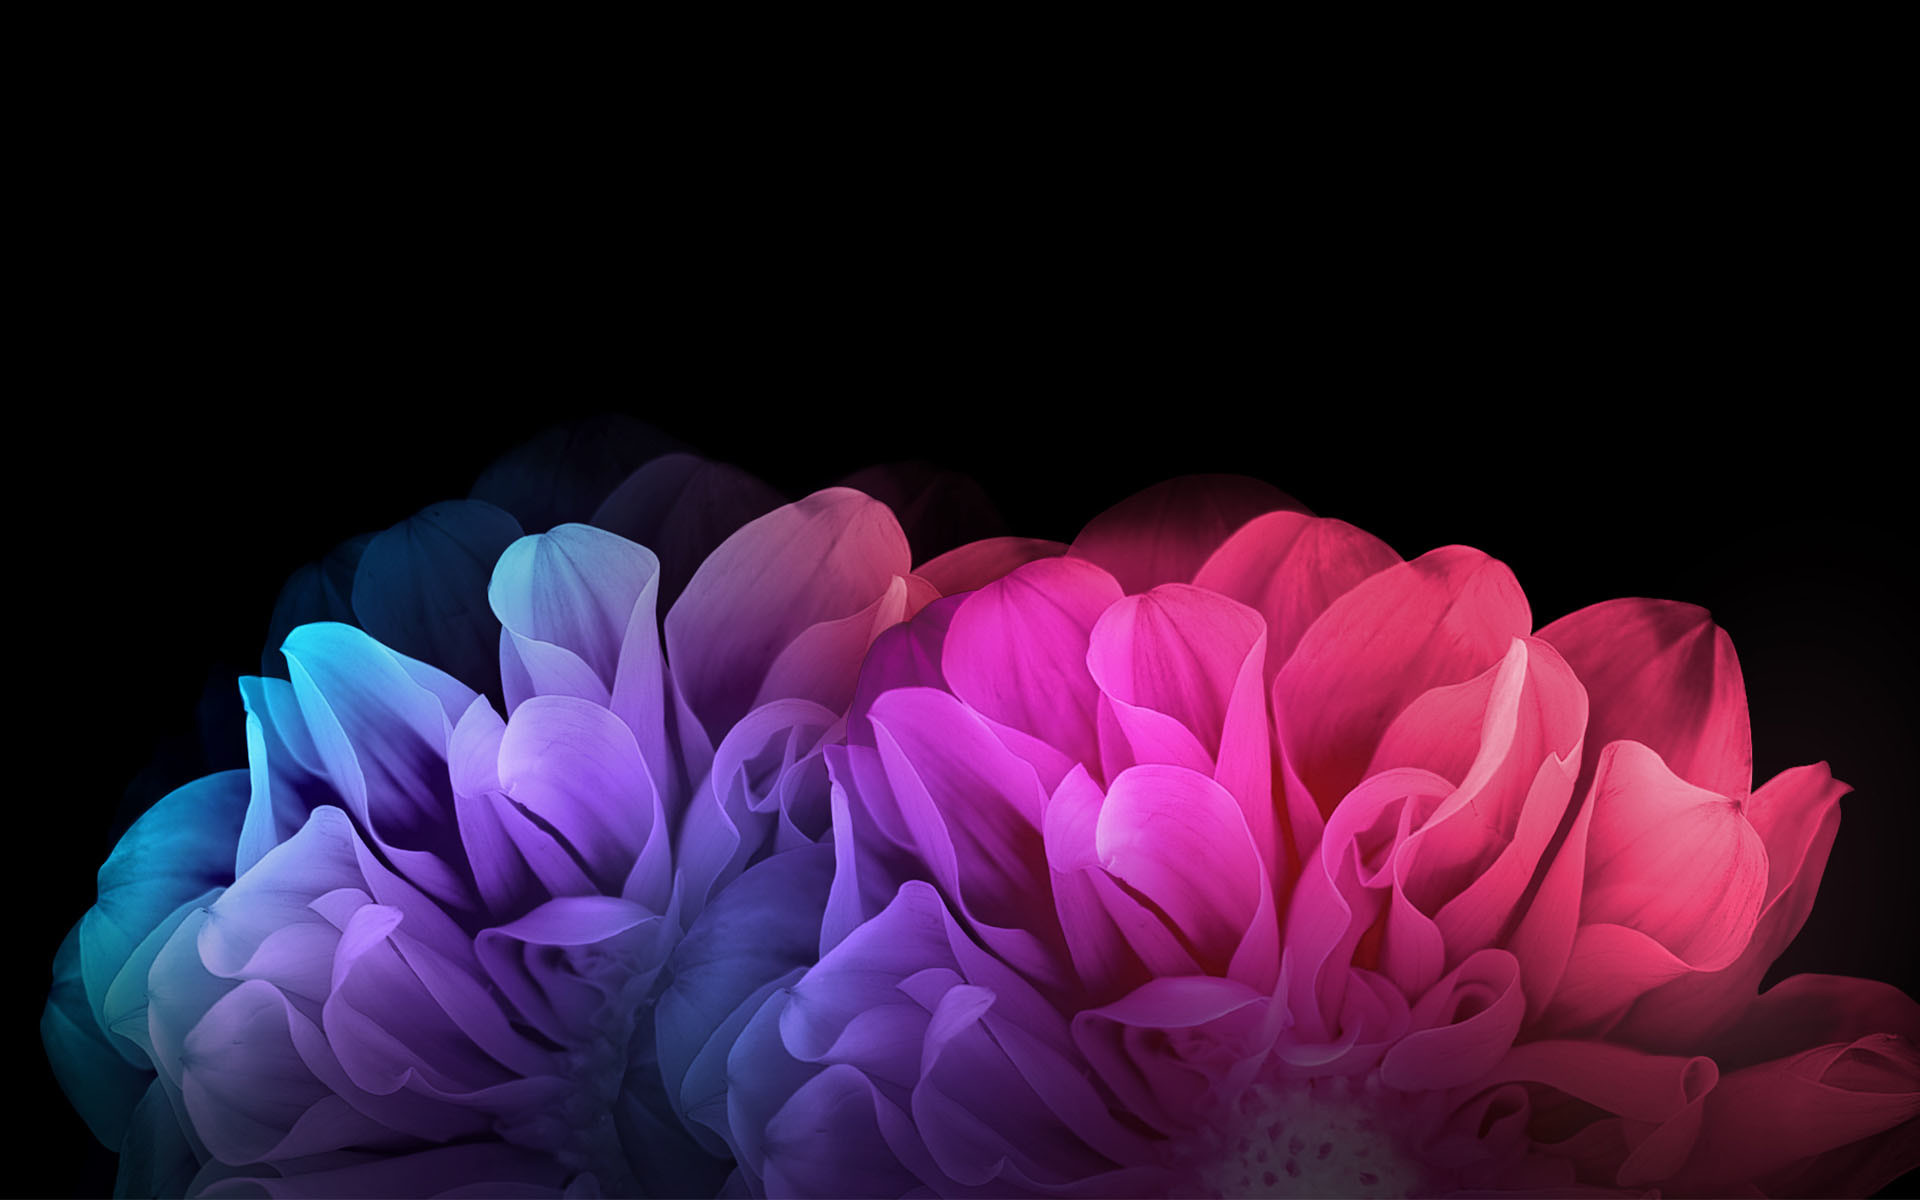 Nice colorful flowers with black background hd wallpaper for desktop. Â«Â«